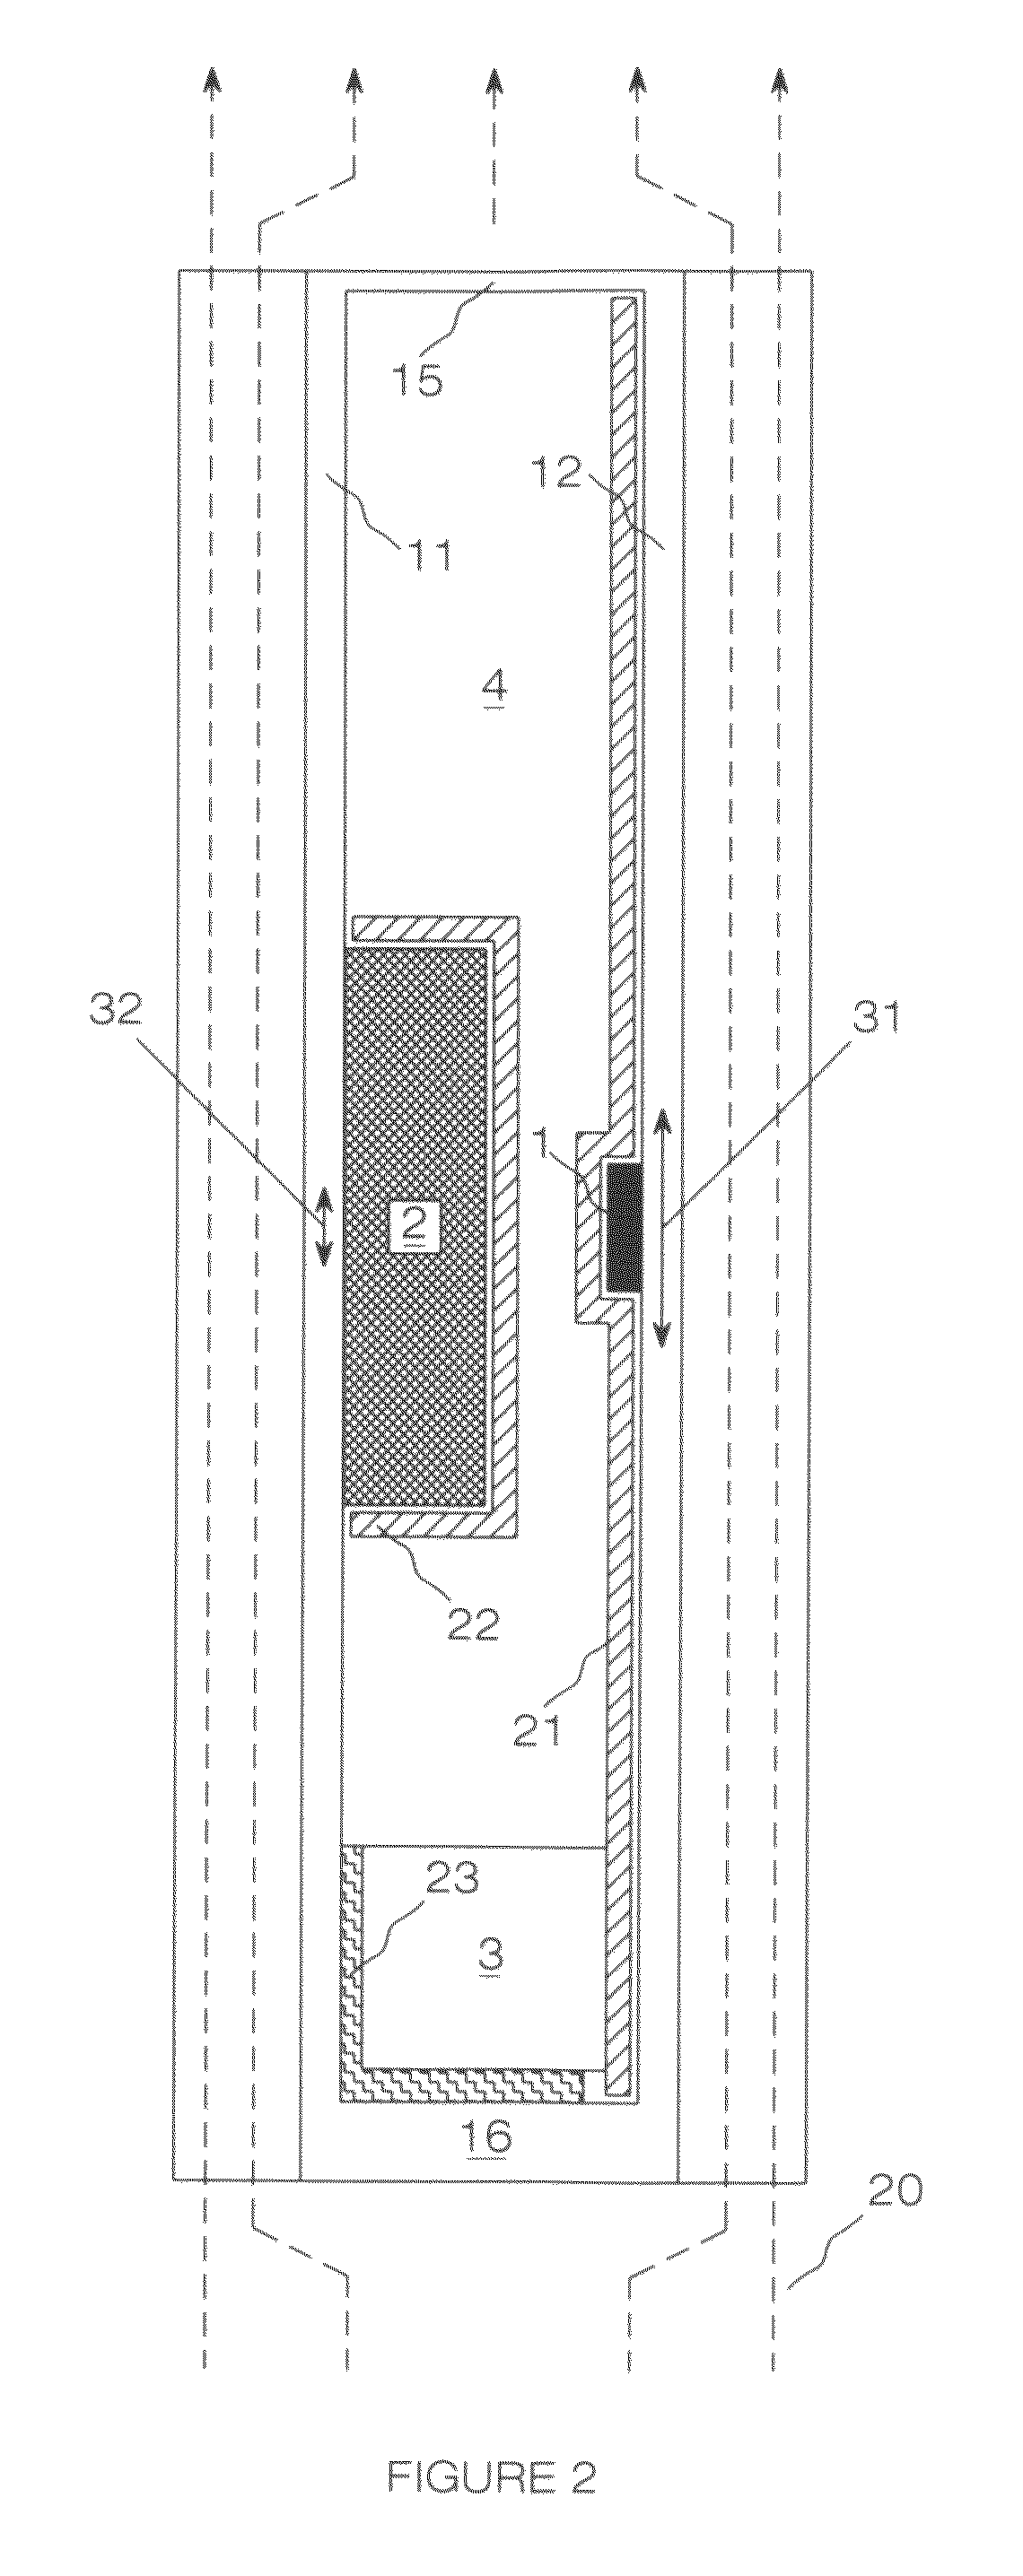 Power converter with linear distribution of heat sources